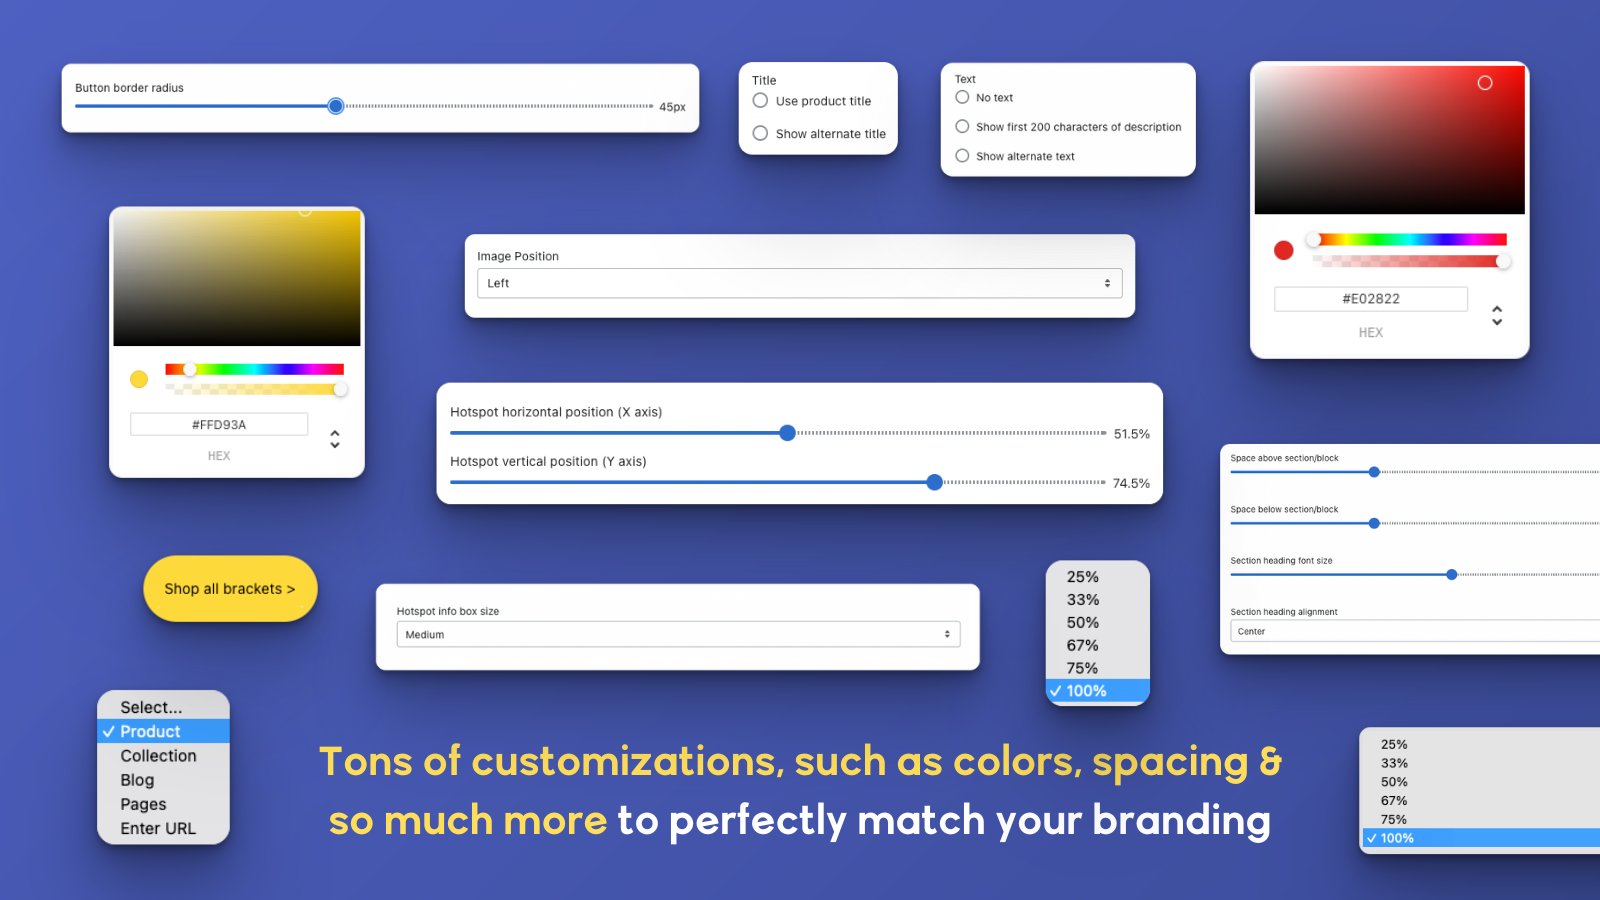 Lots of customization options to easily match your branding